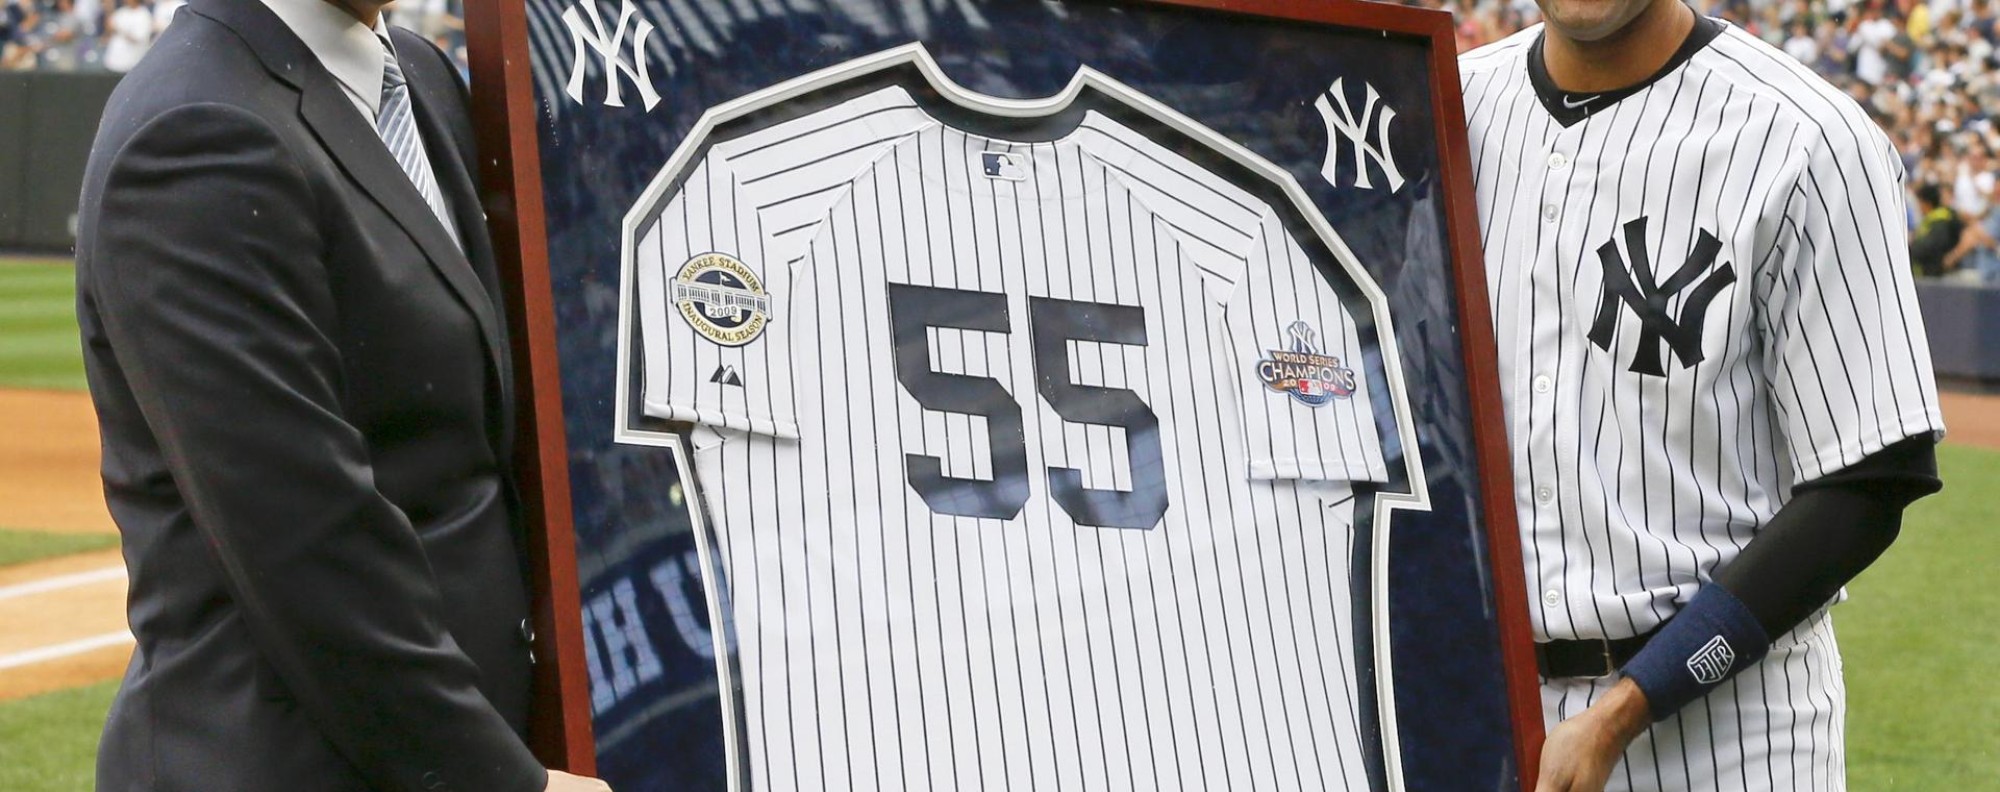 Baseball fans give retired Matsui a farewell to remember